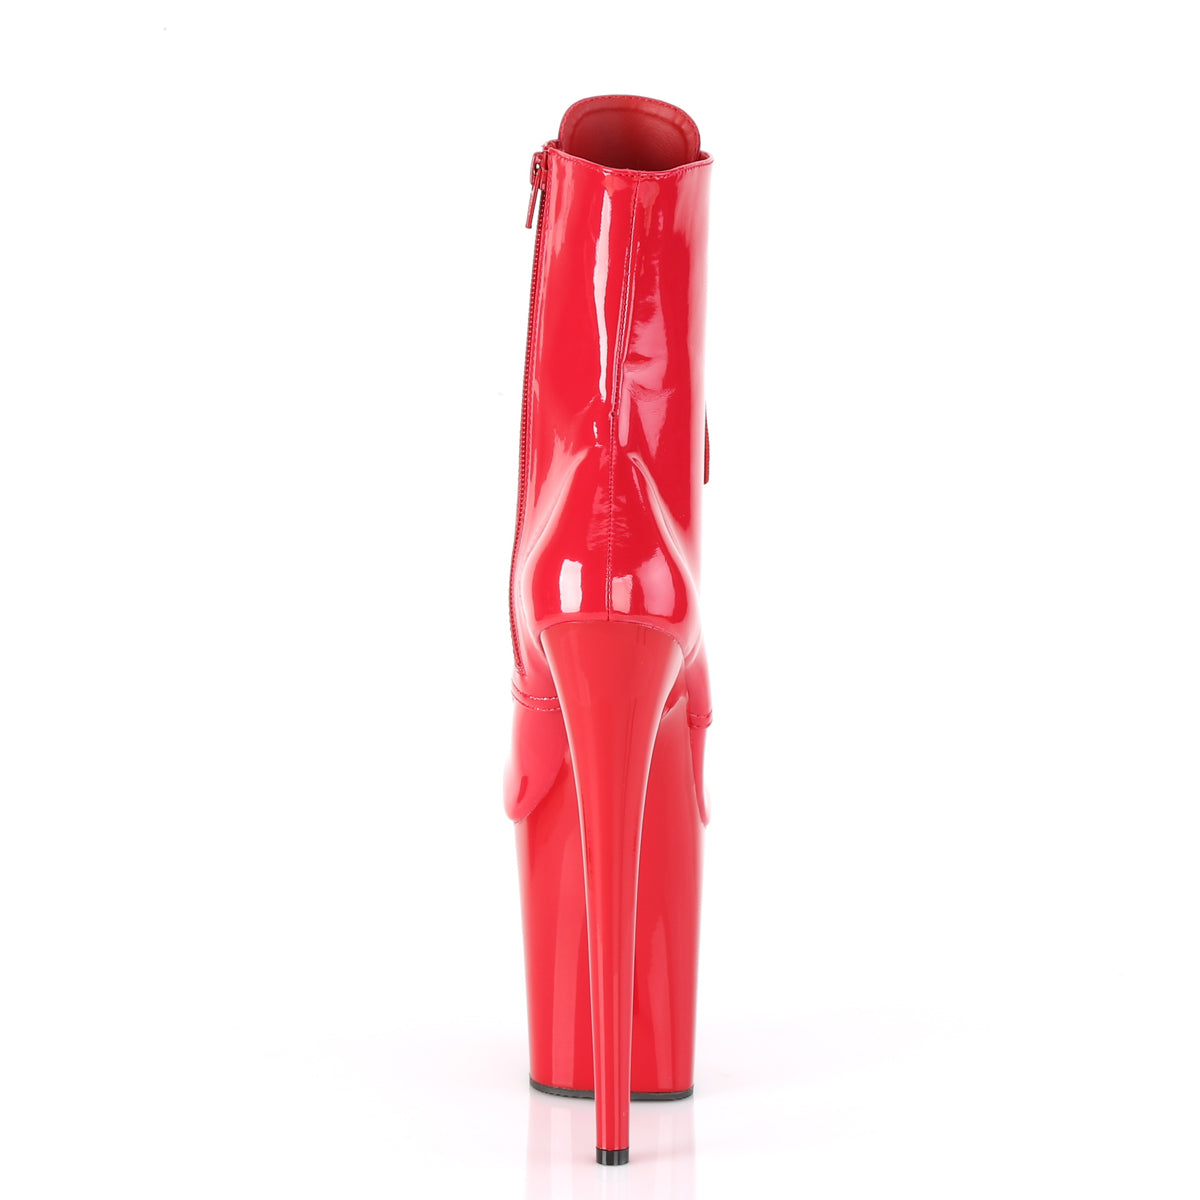 FLAMINGO-1020 / R / M 8 "PLEASER FAST DELIVERY 24-48h 